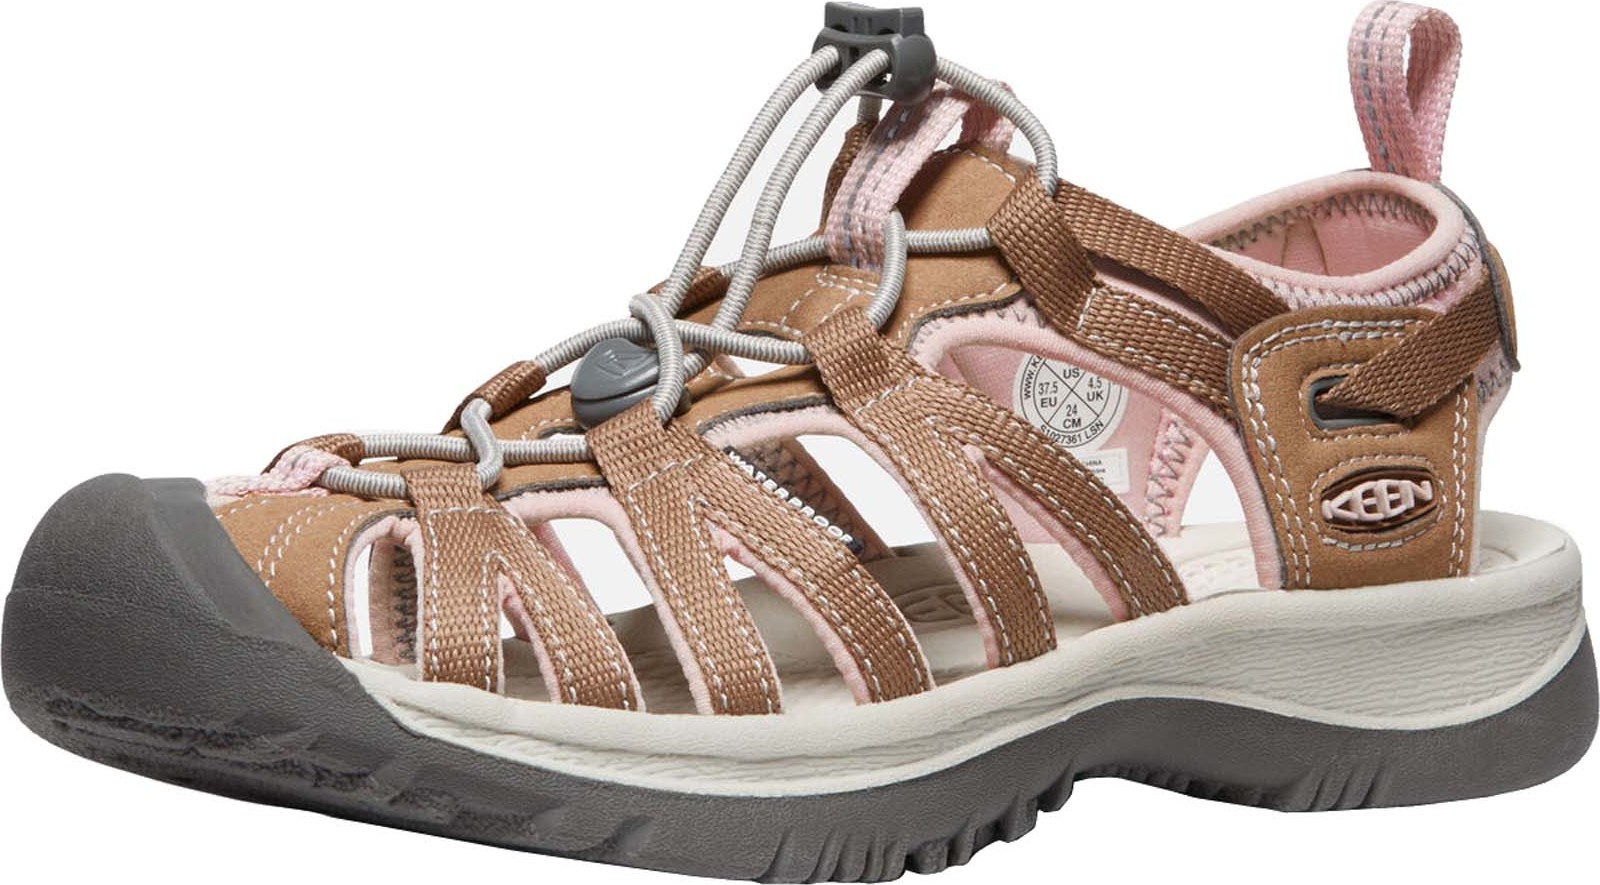 Keen Women’s Whisper Toasted Coconut/Peach Whip